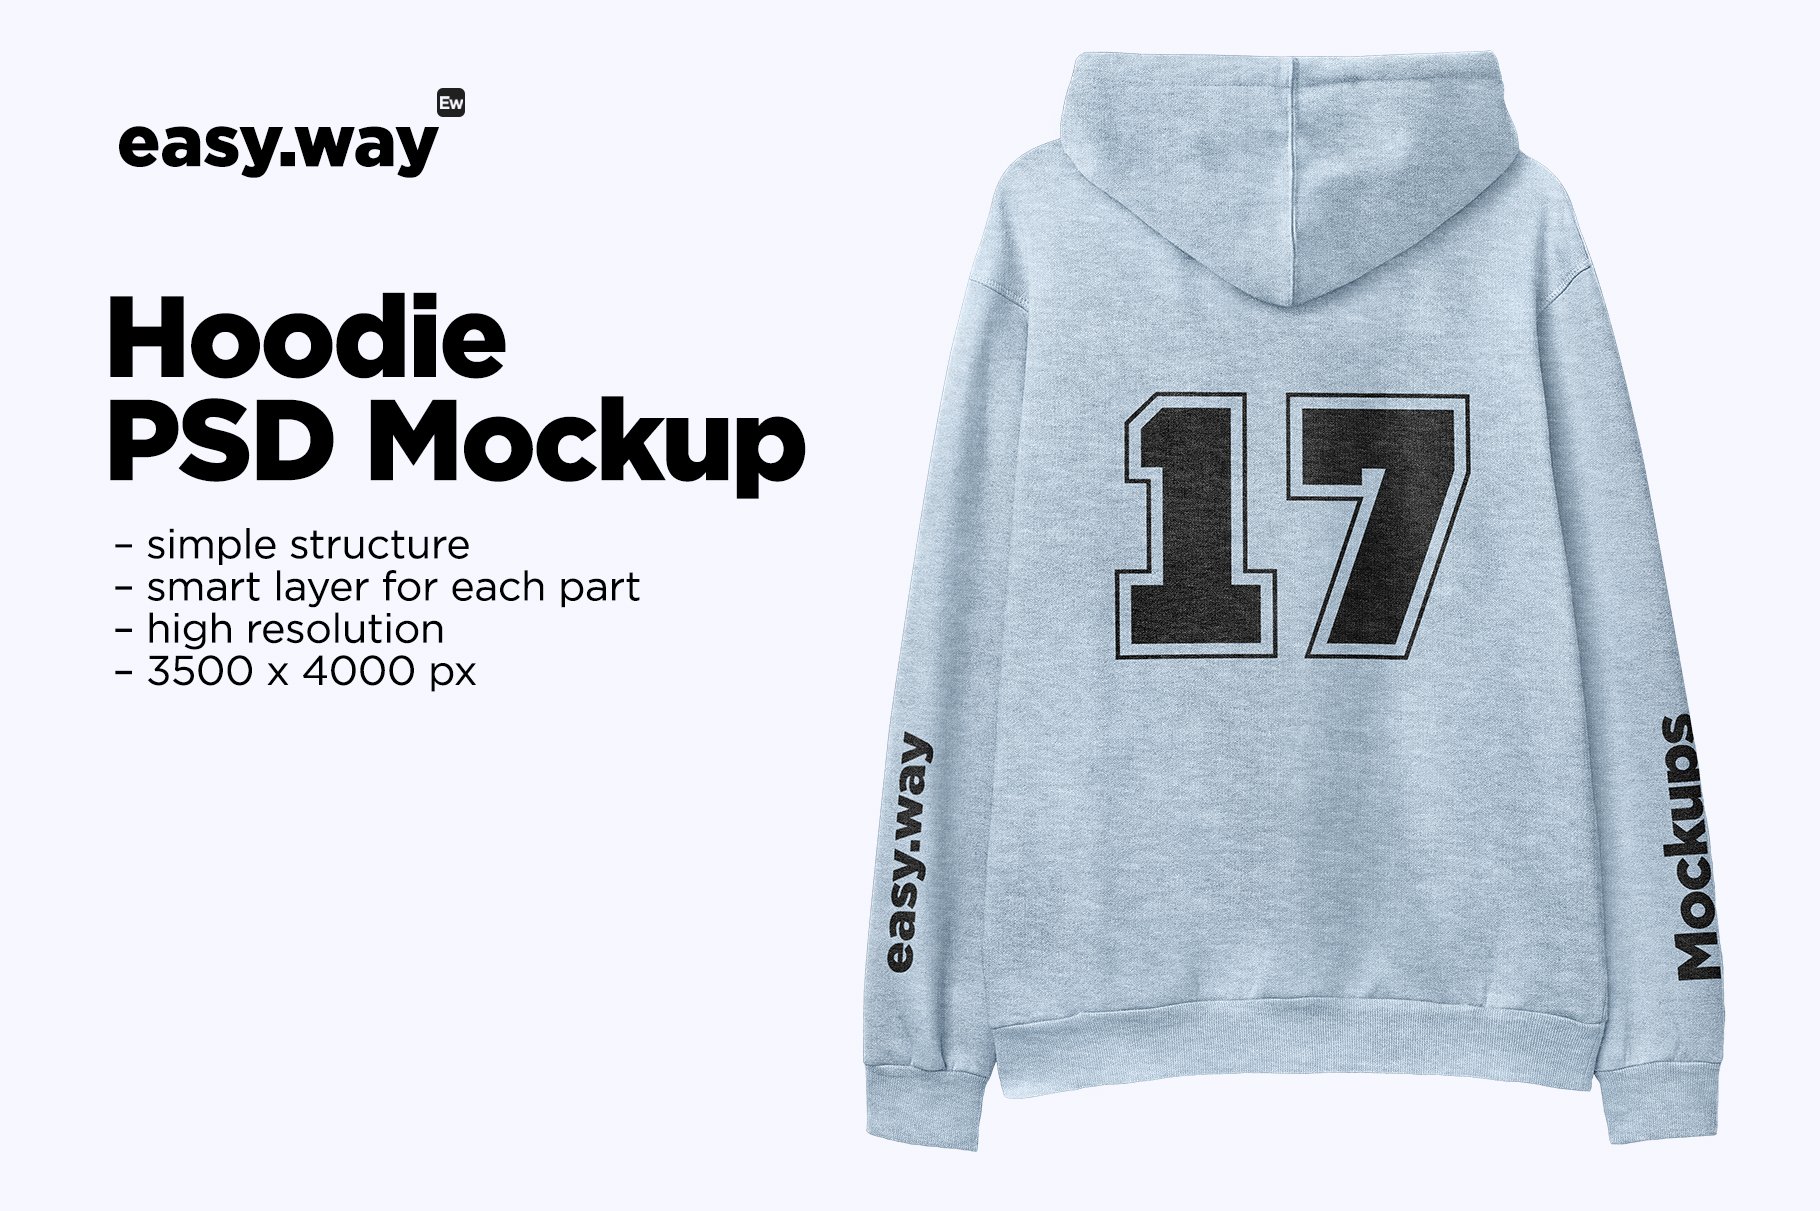 Heather Hoodie Back View PSD Mockup cover image.